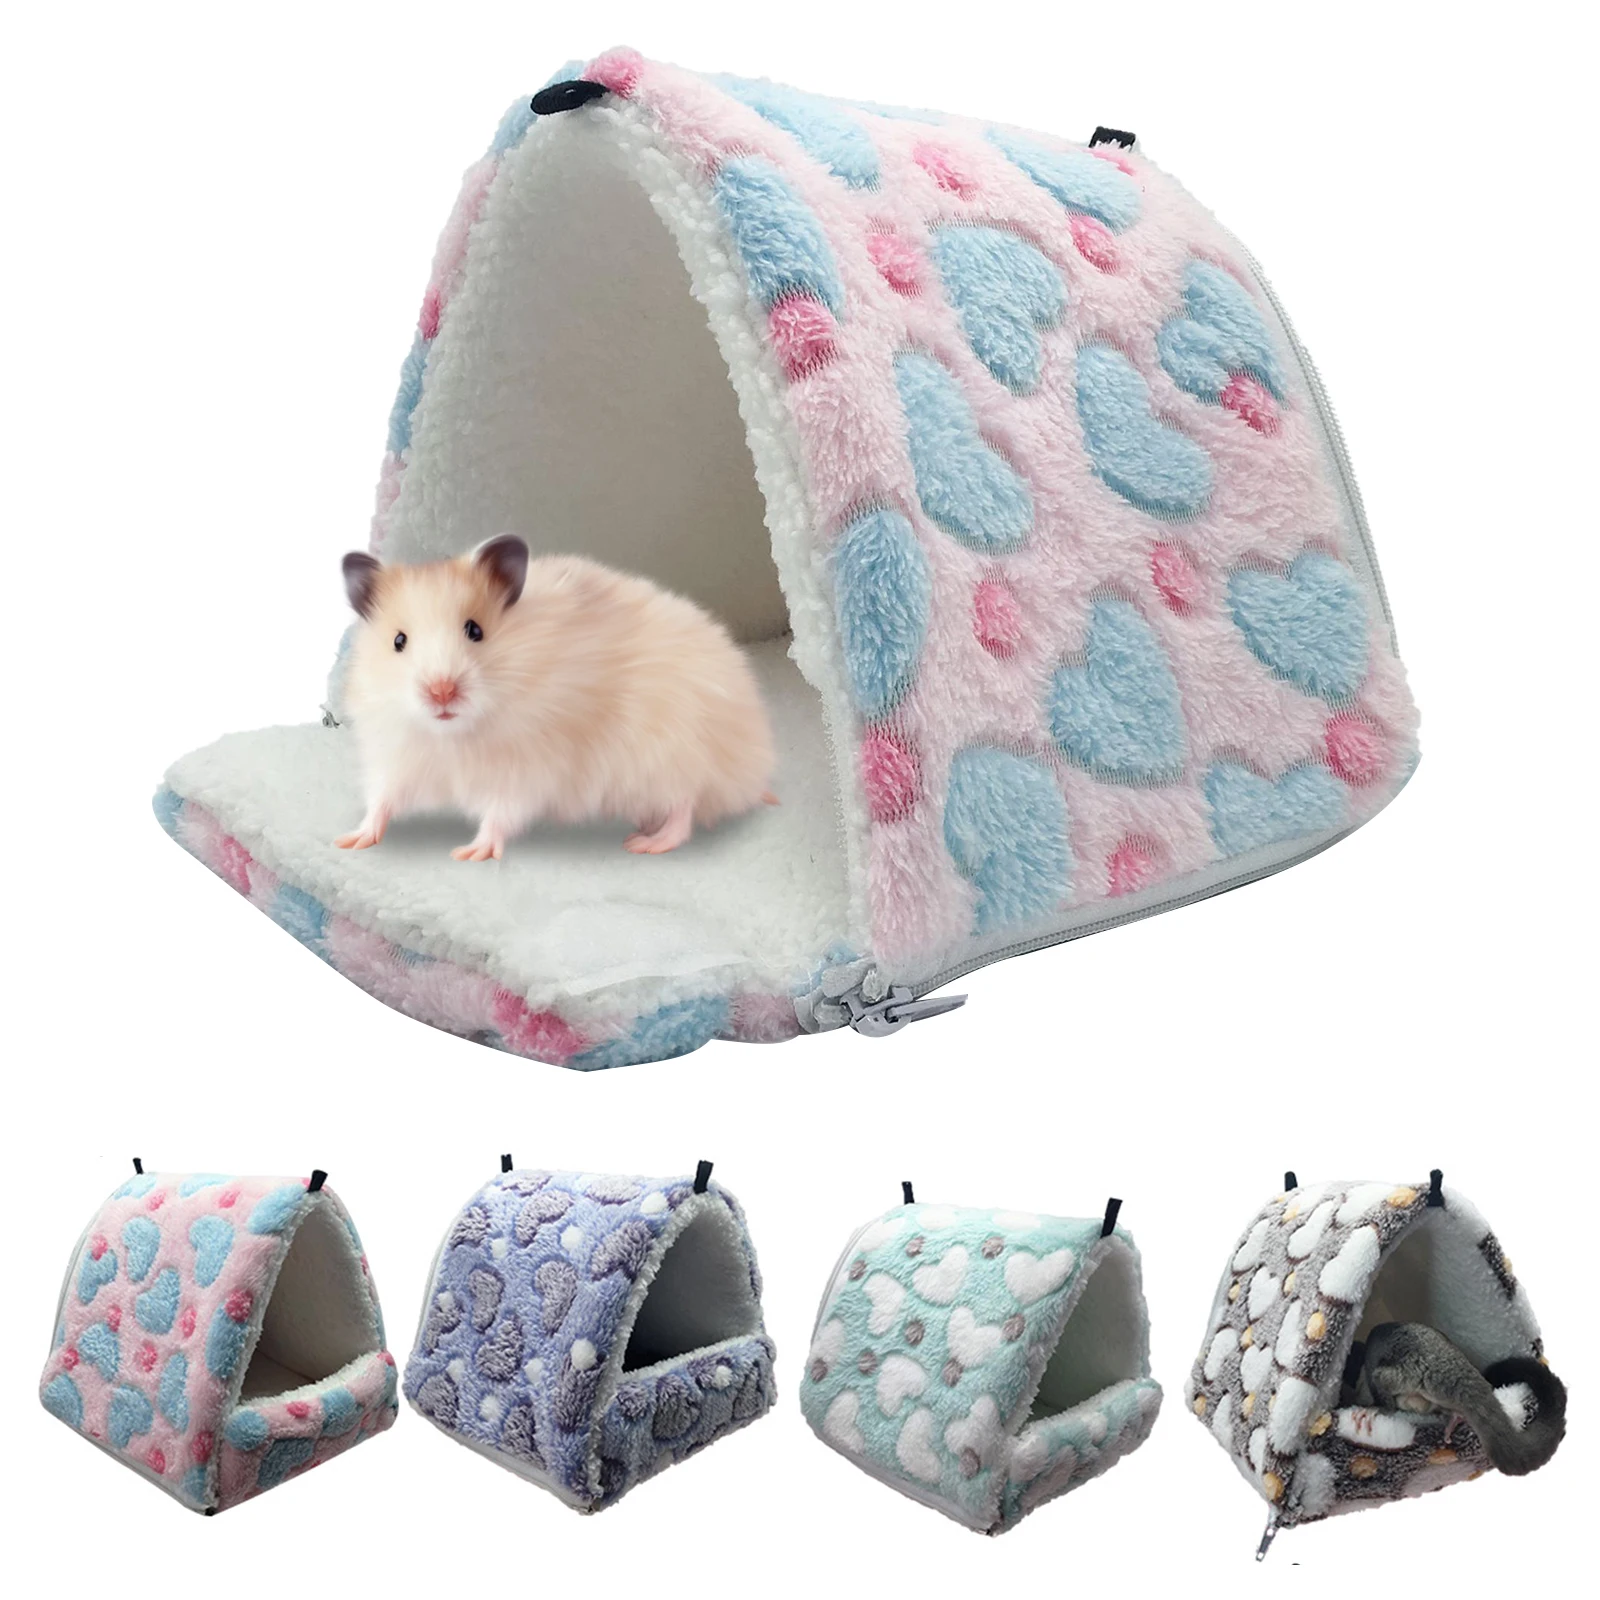 

Small Animal Pets Cages Winter Springs Hamster Guinea Pig Squirrel Keep Warm Nest Soft Comfortable Sleeping Bed Hammock Tent